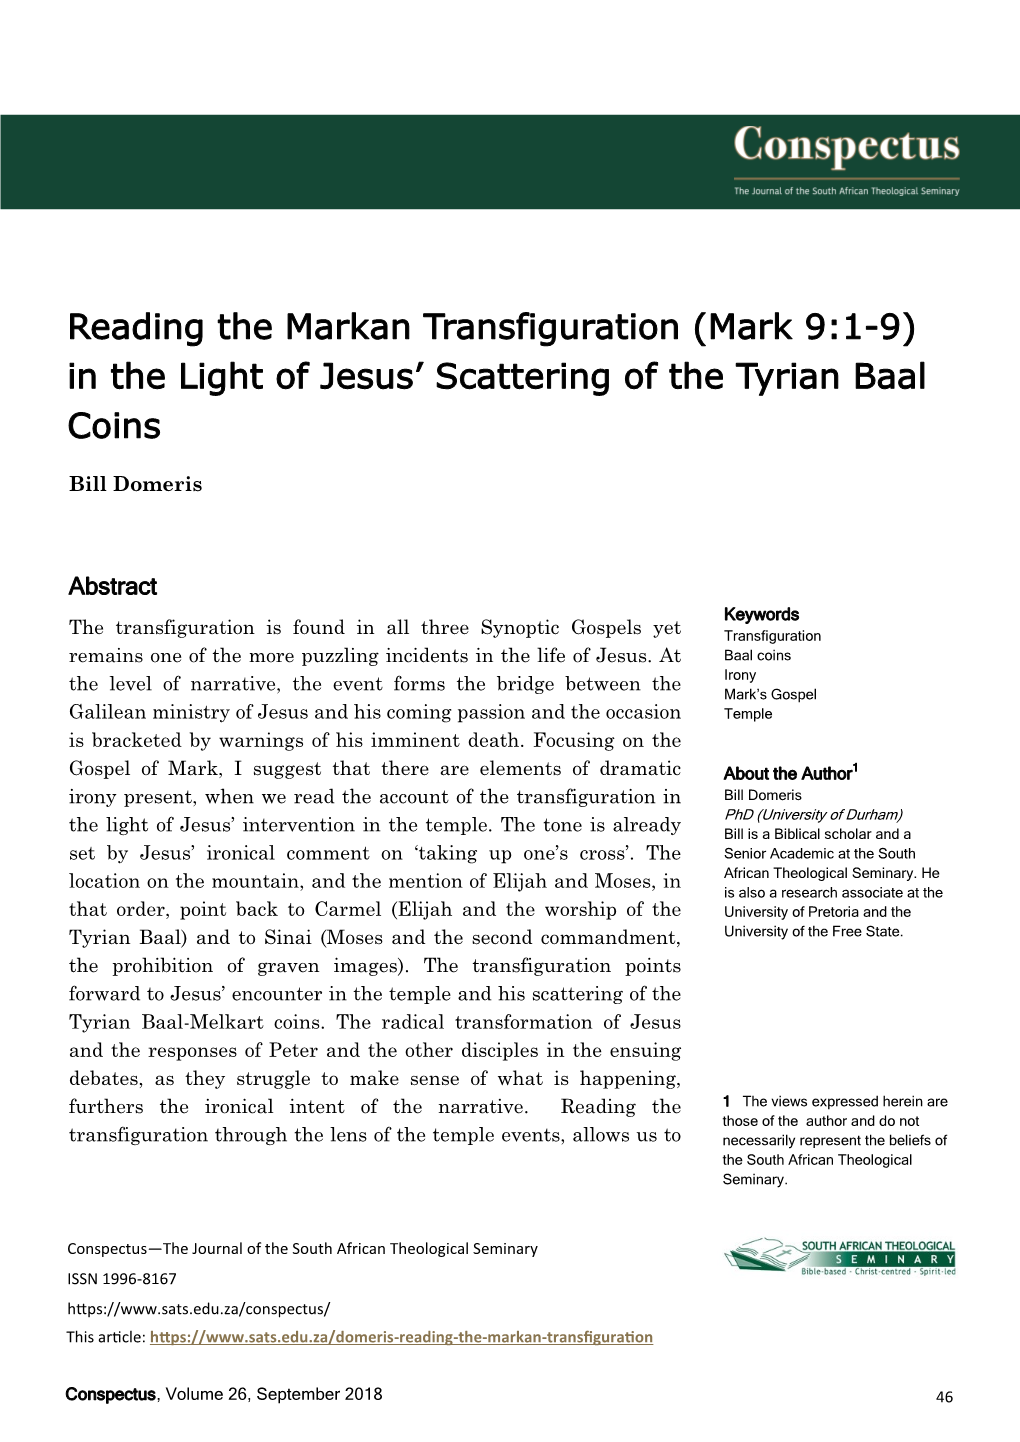 (Mark 9:1-9) in the Light of Jesus' Scattering of the Tyrian Baal Coins